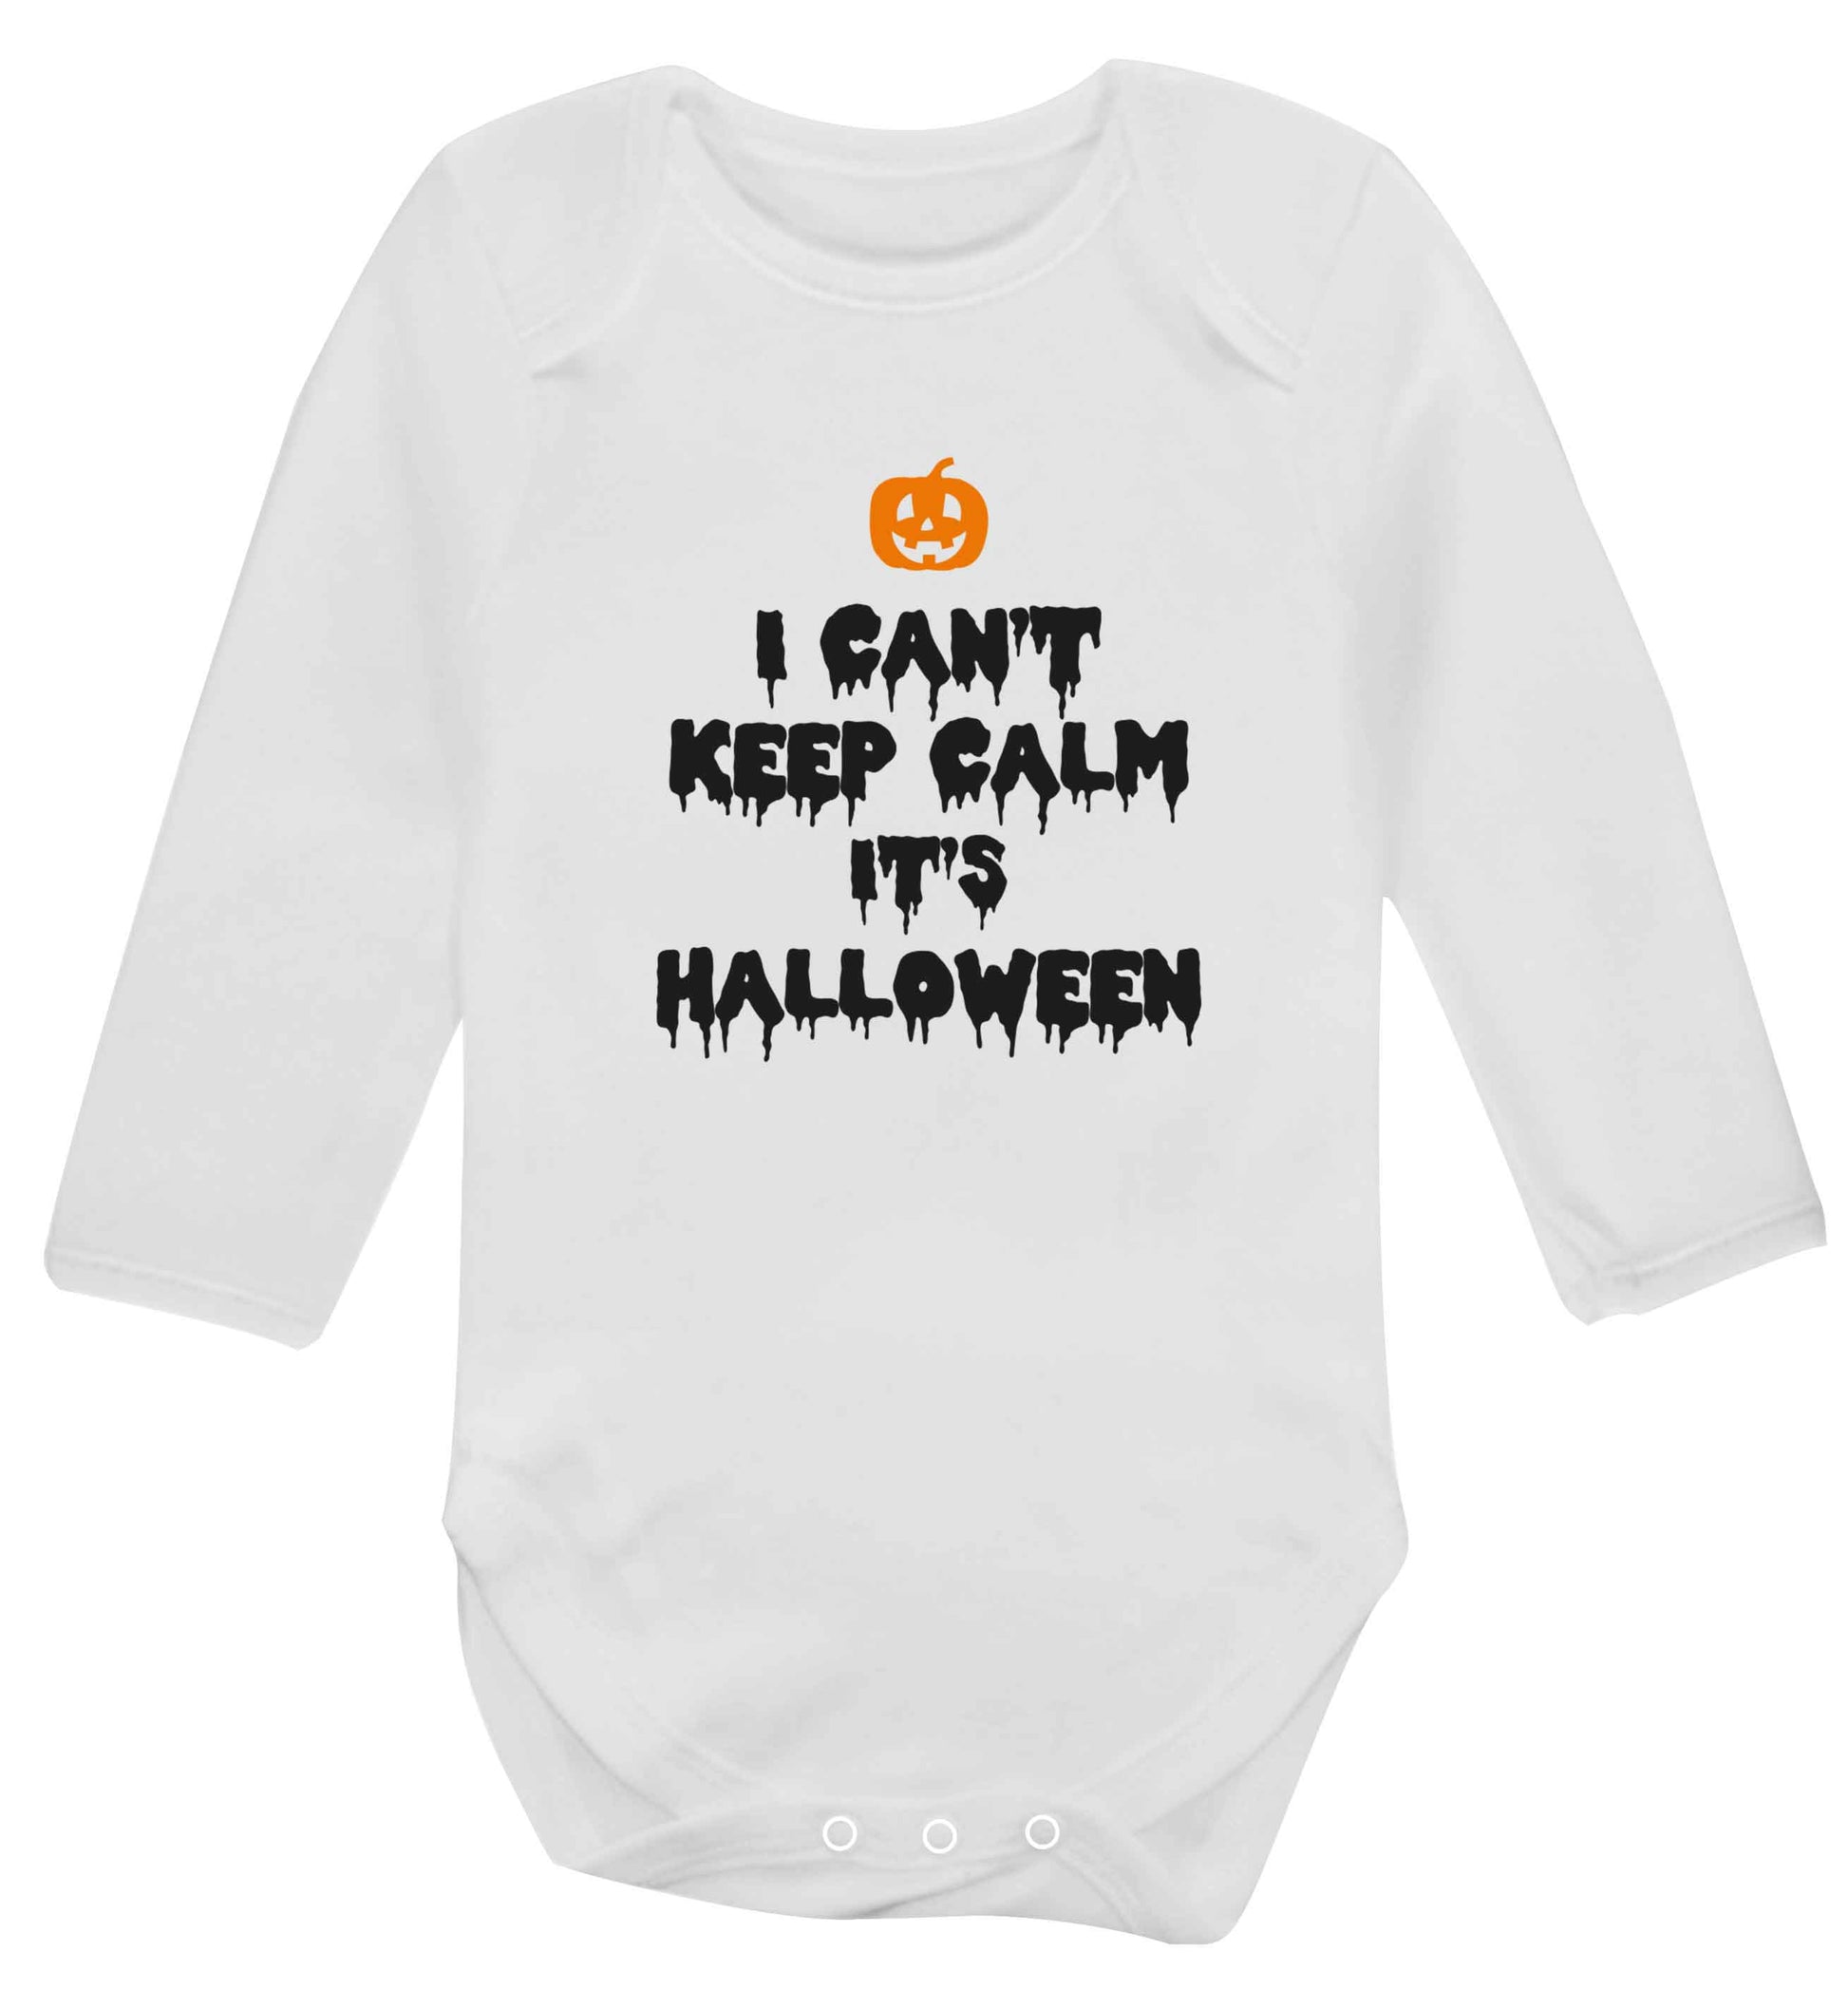 I can't keep calm it's halloween baby vest long sleeved white 6-12 months